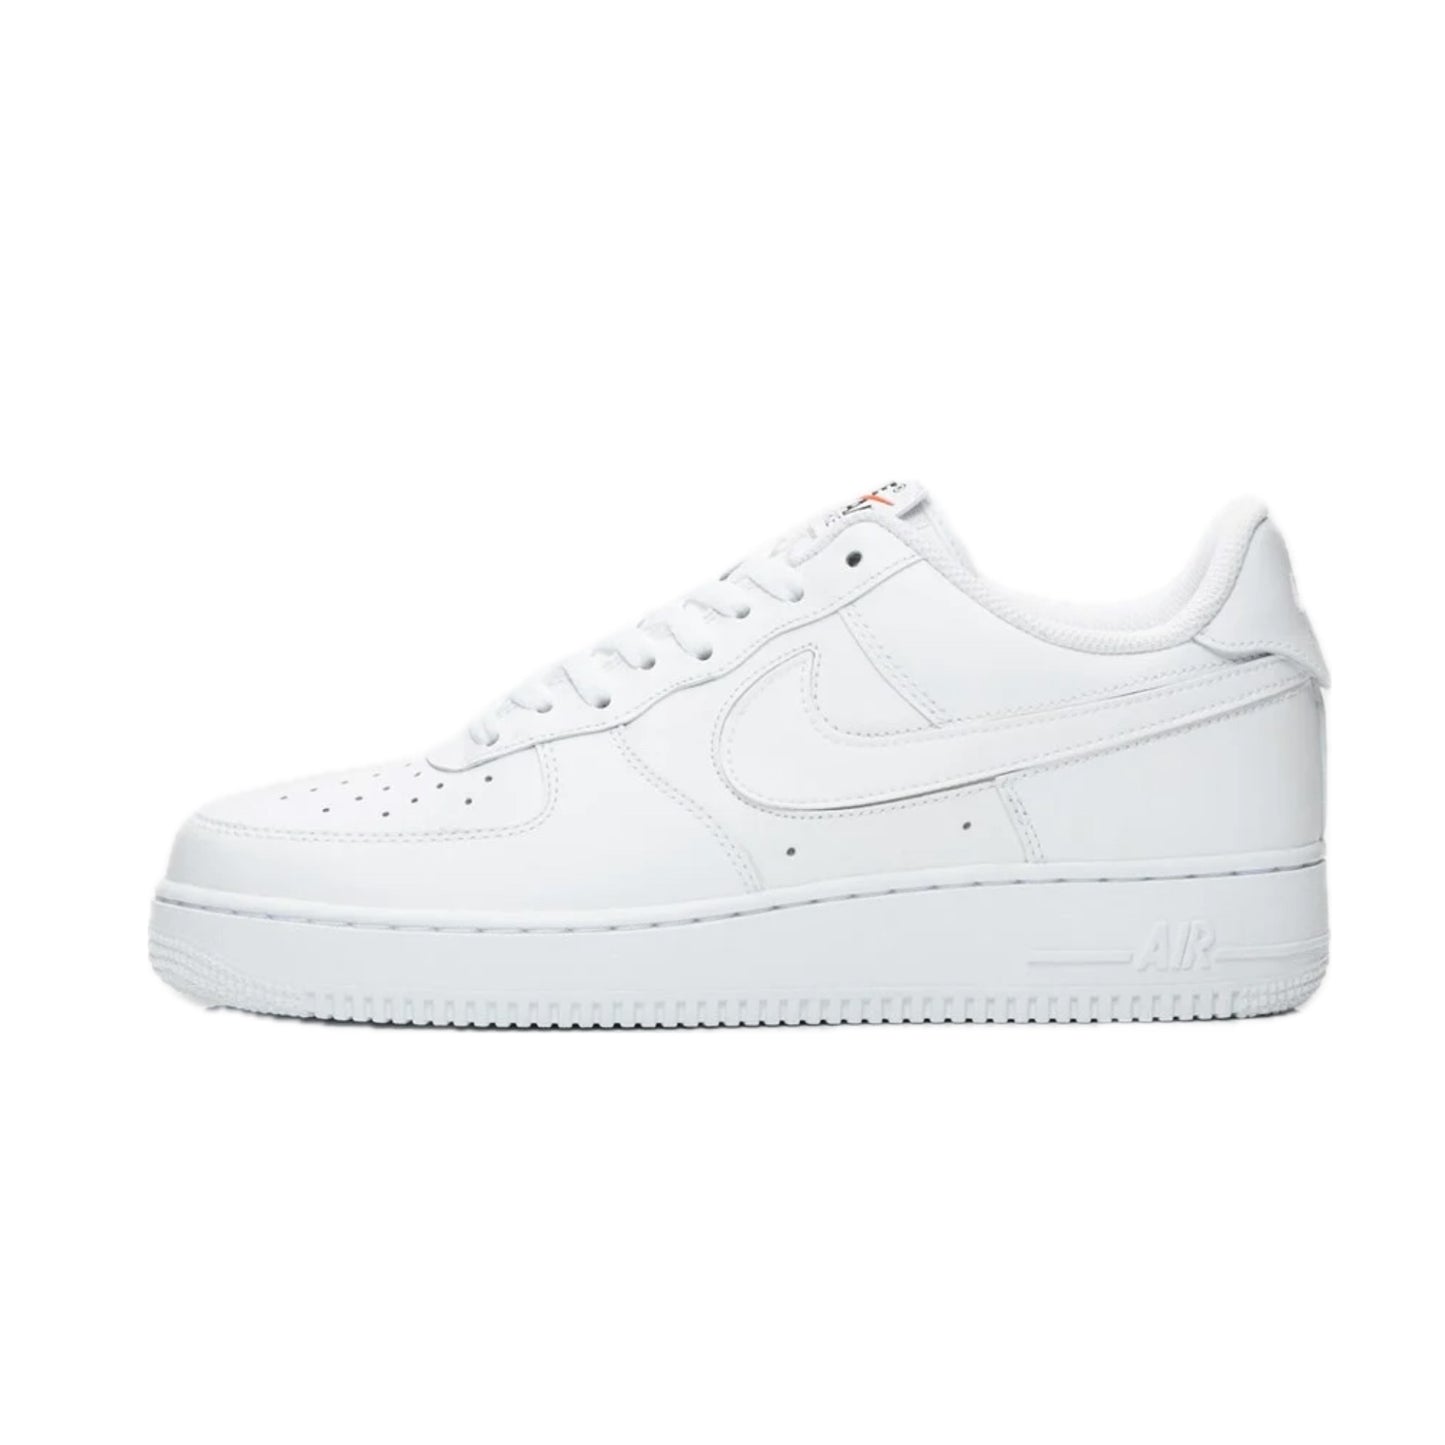 Nike Air Force 1 Low Swoosh Pack All-Star White